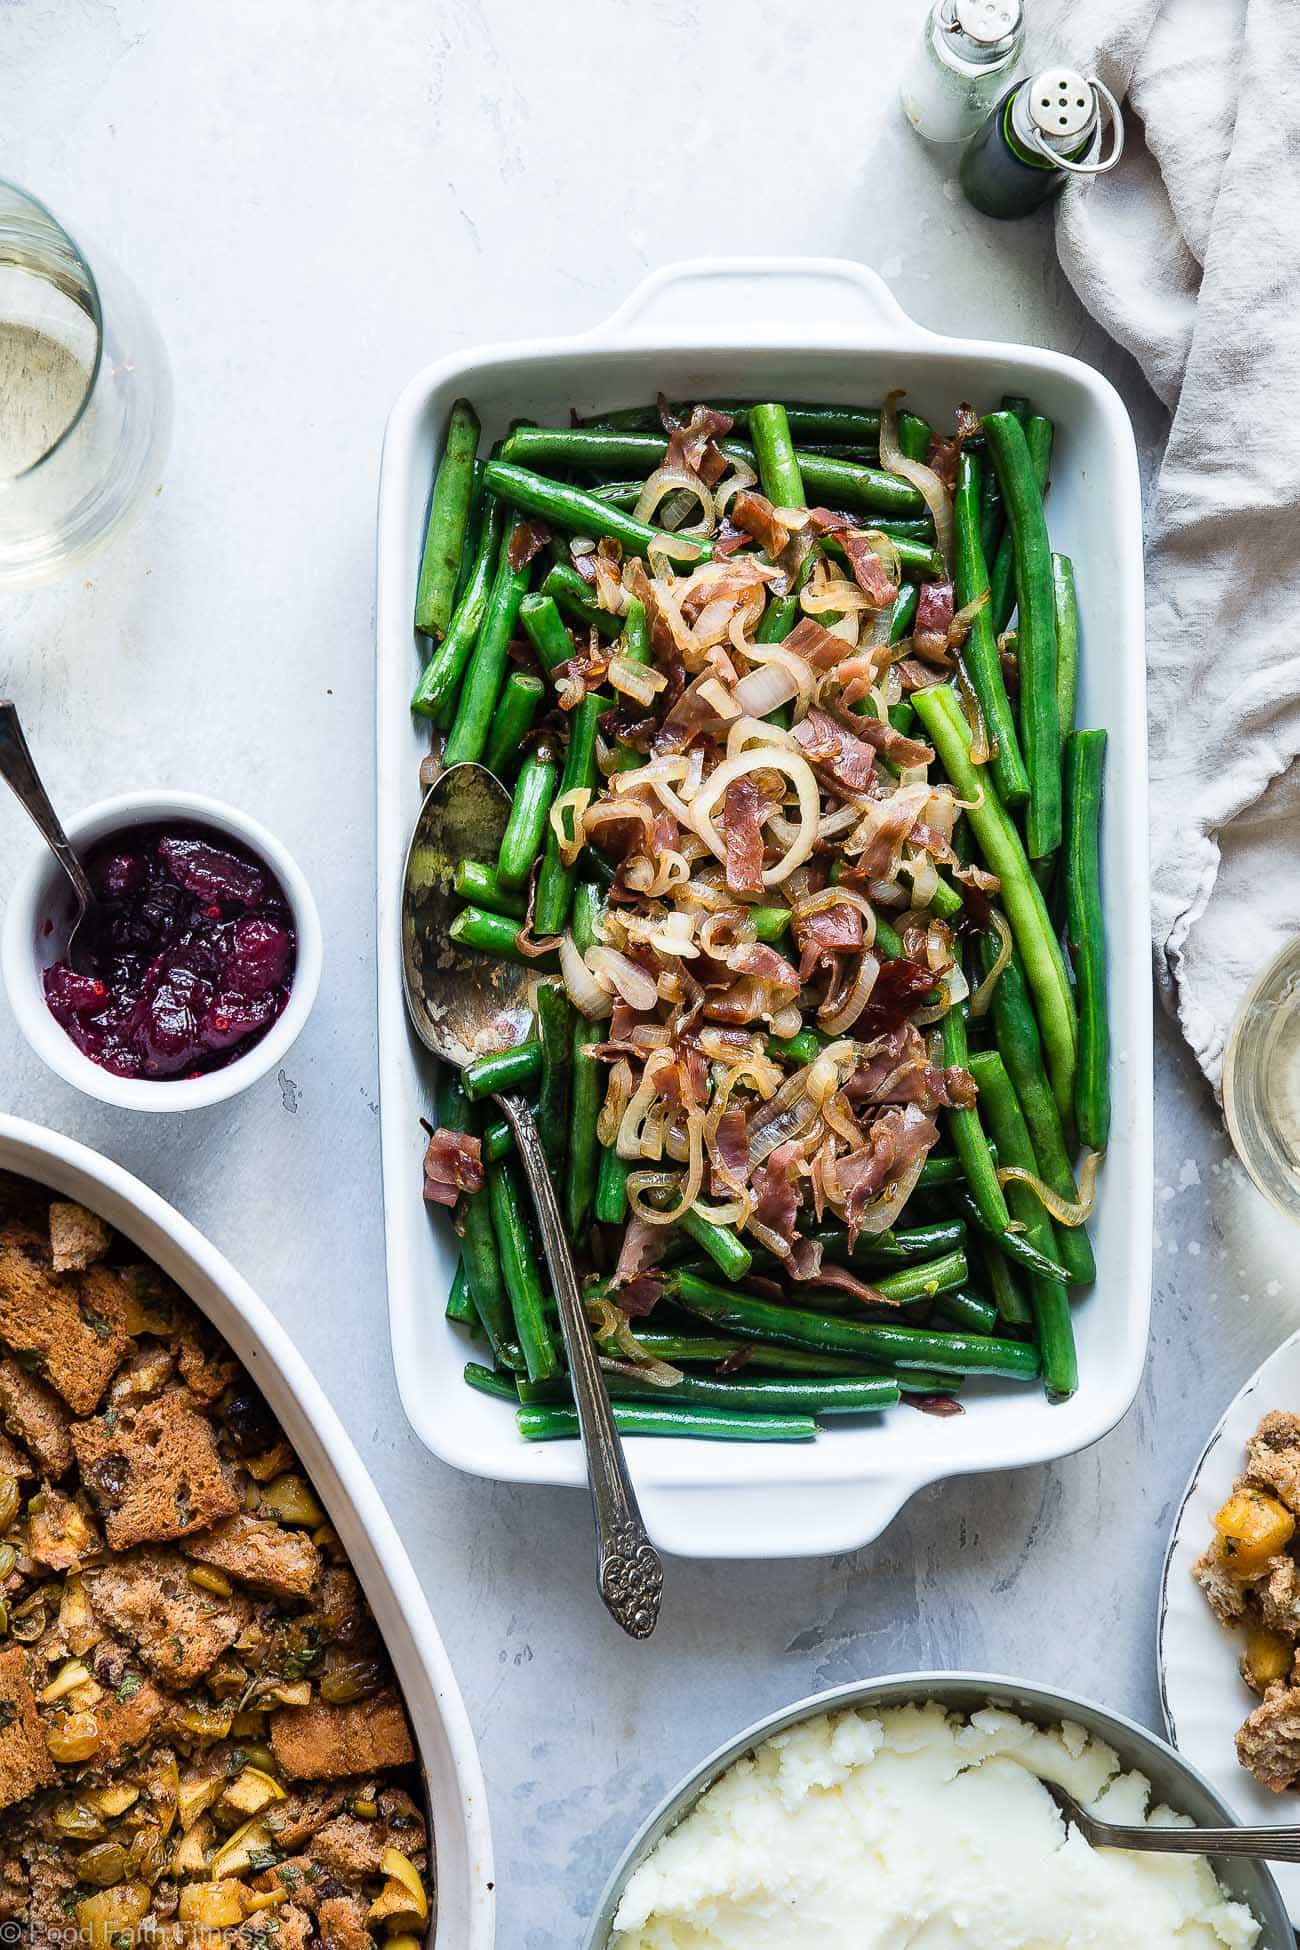 Recipe for Sauteed Green Beans with Crispy Prosciutto - This easy sautéed fresh green beans recipe comes together in only 15 minutes! It's only 4 ingredients, paleo friendly and 100 calories! | Foodfaithfitness.com | @FoodFaithFit